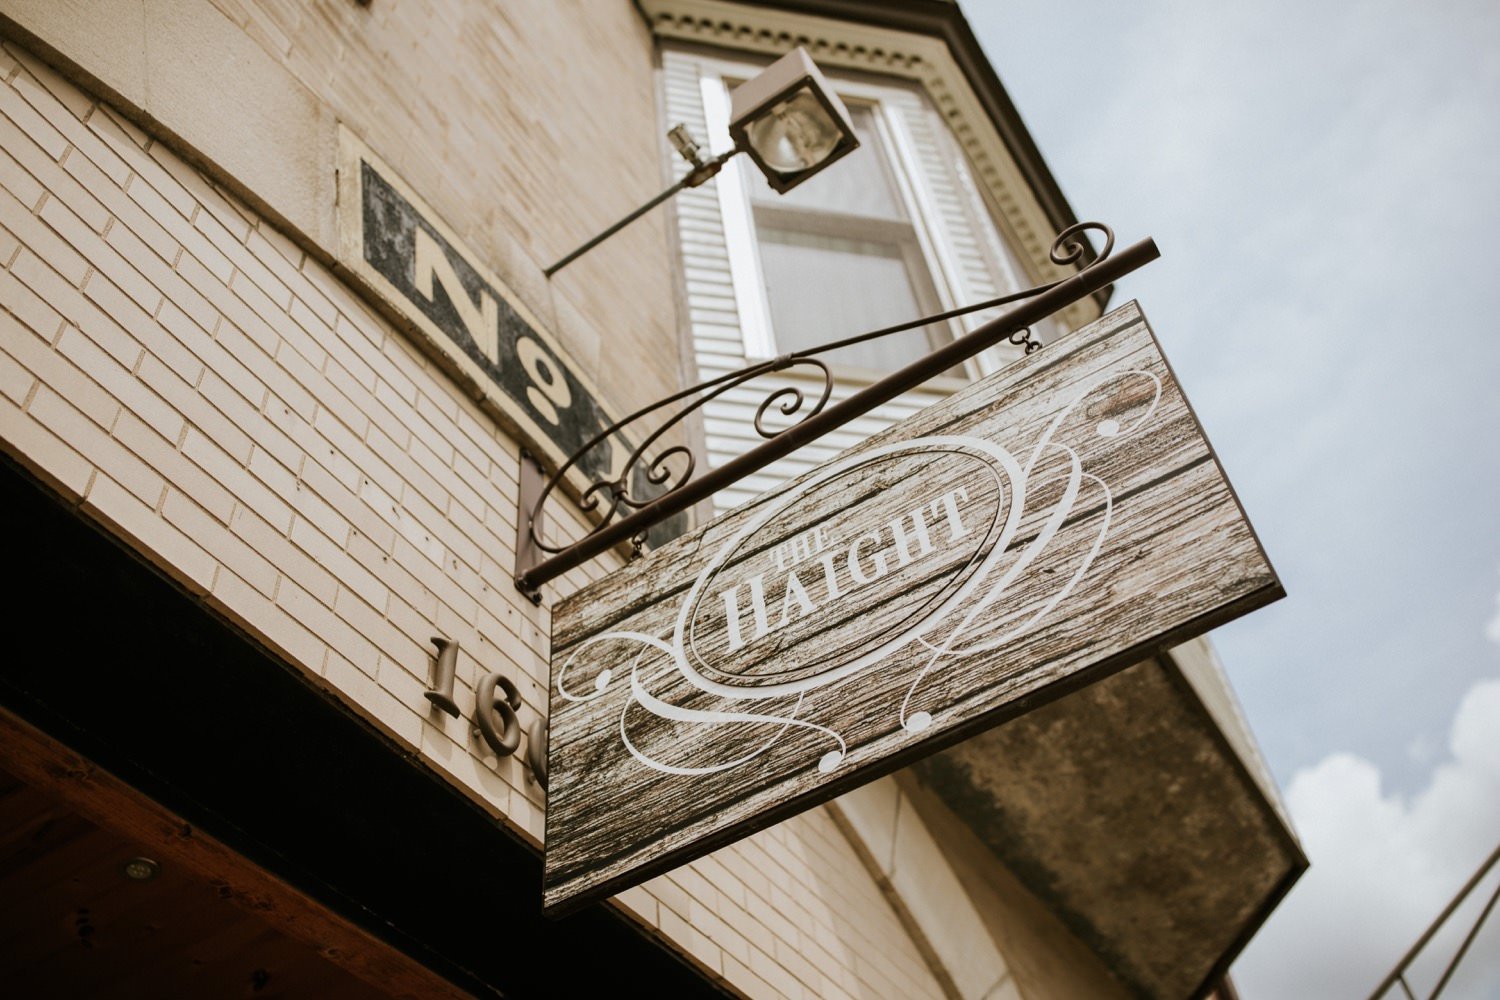 The Haight is a Industrial wedding venue in Chicago suburbs